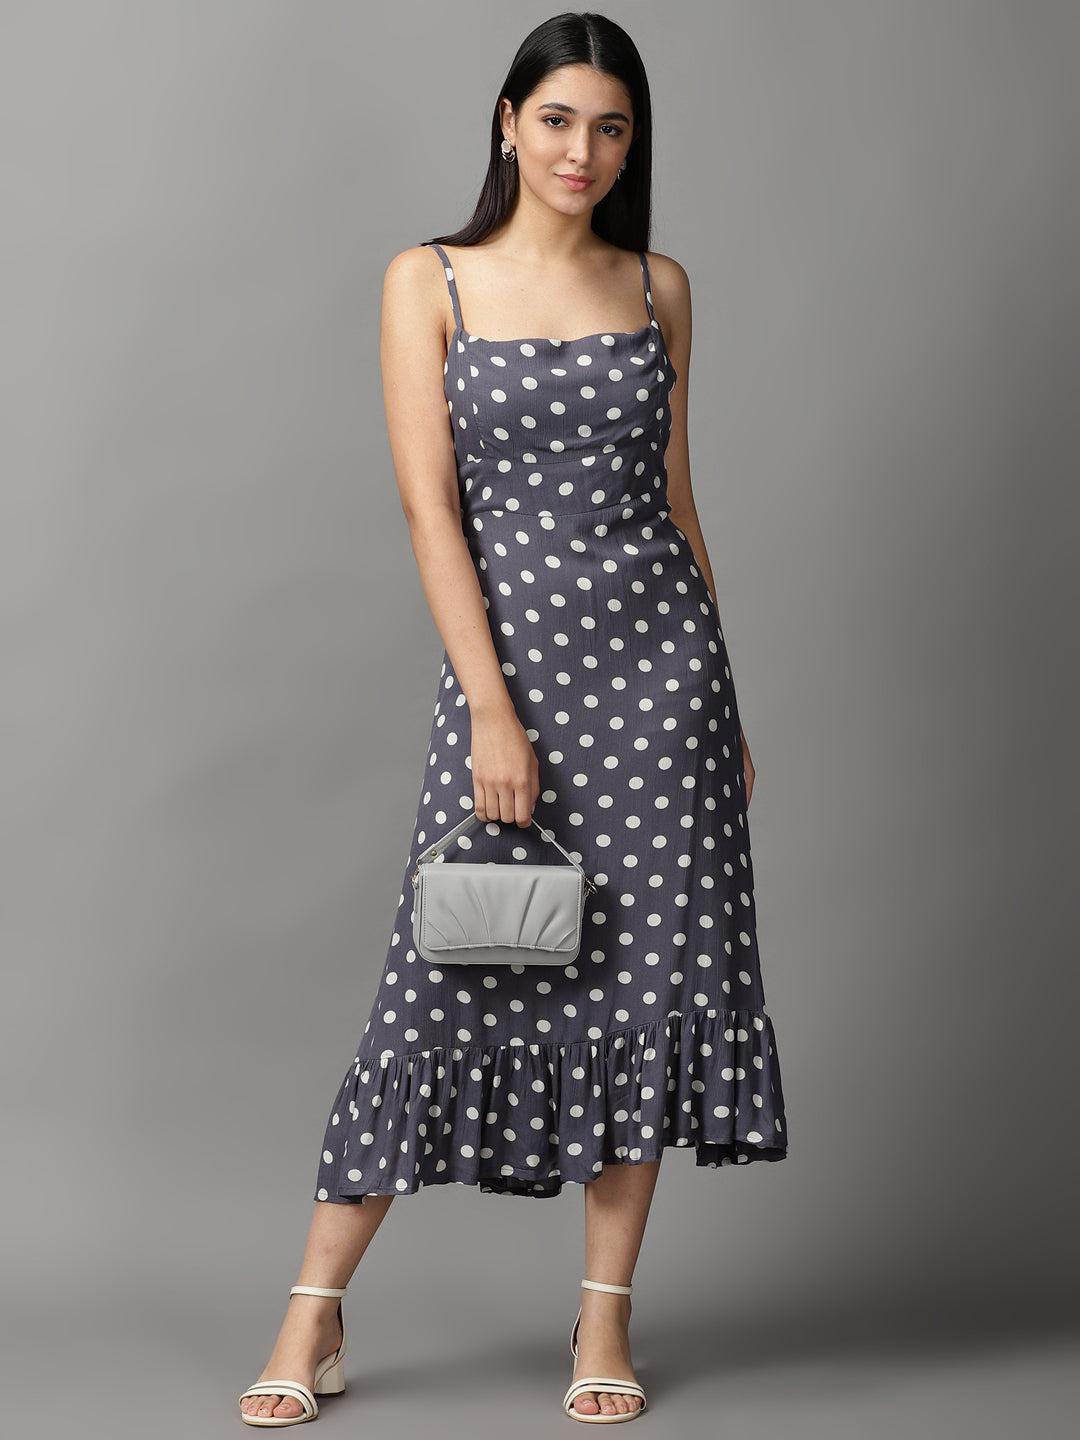 Women's Grey Polka Dots Fit and Flare Dress